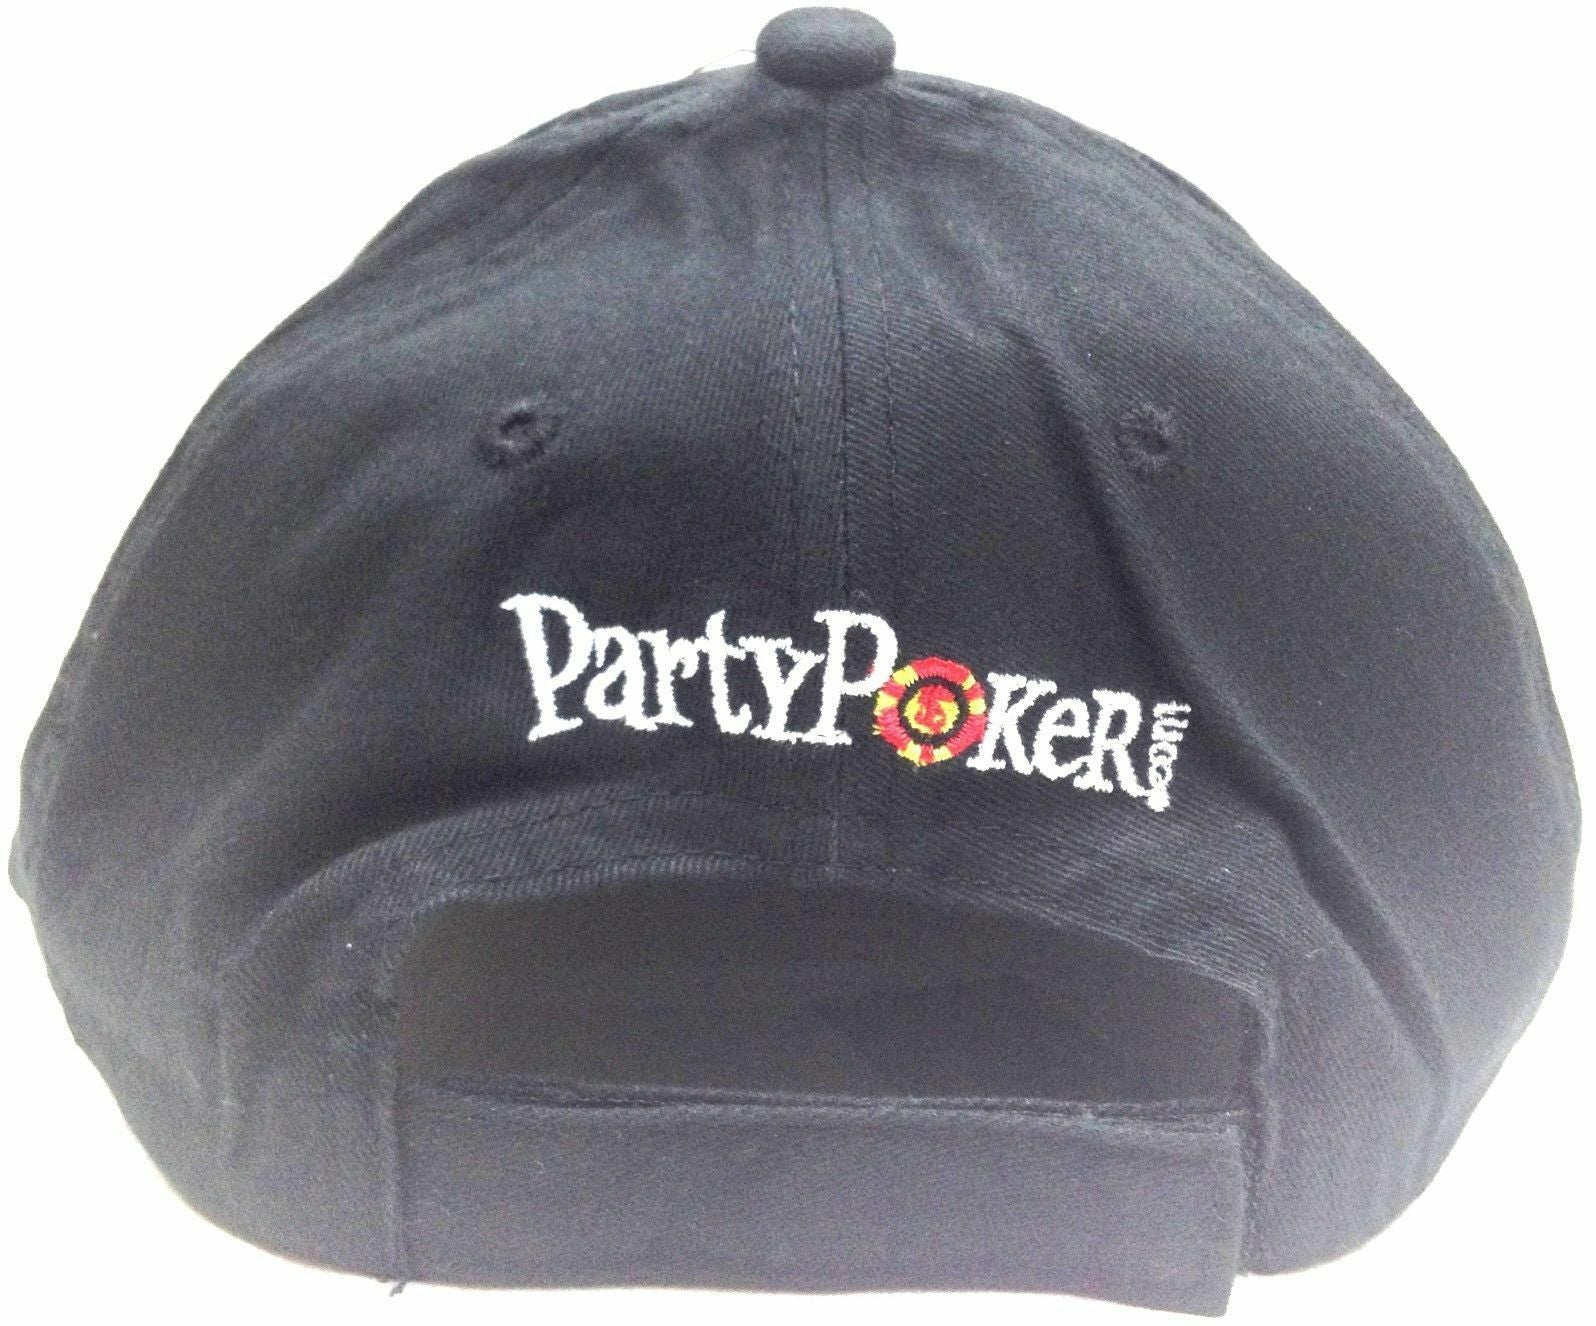 NEW PARTY POKER worlds largest POKER ROOM stitched adjustable CAP HAT osfa Image 2